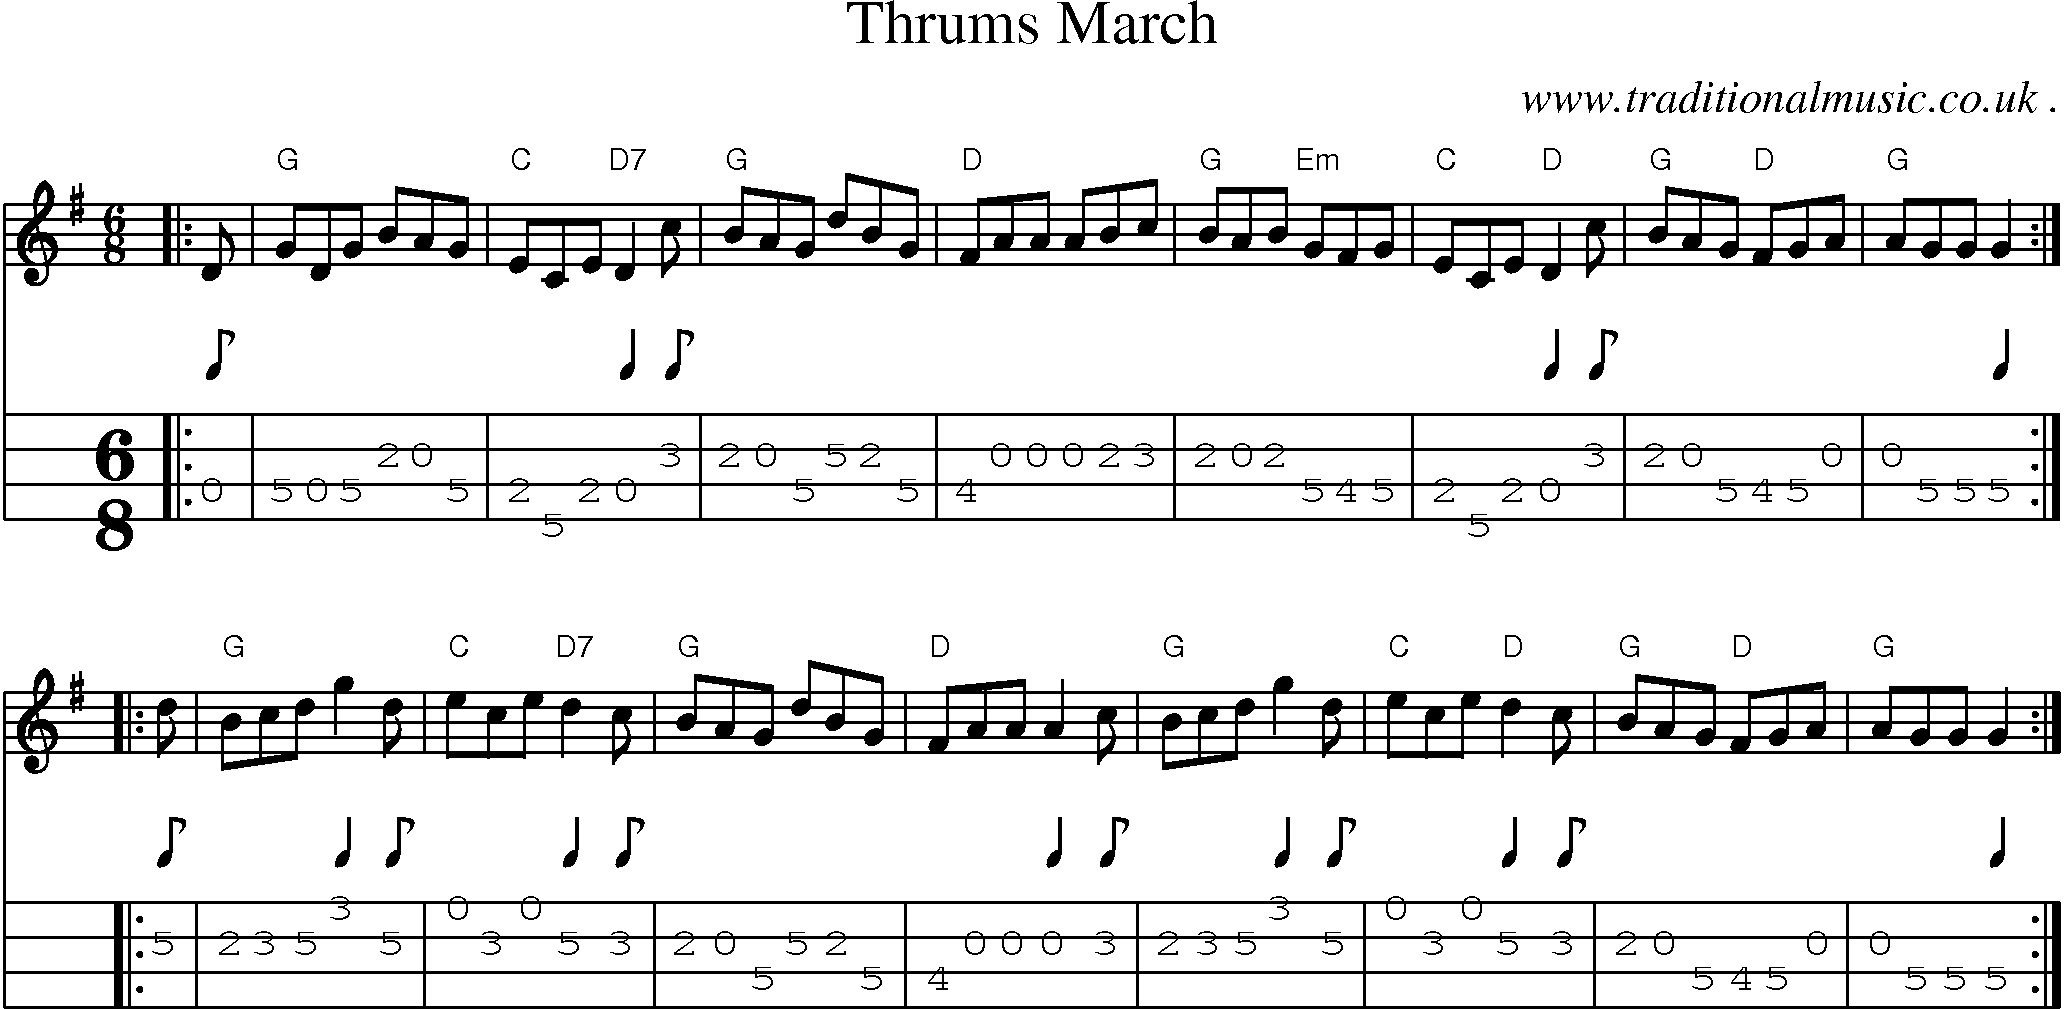 Sheet-music  score, Chords and Mandolin Tabs for Thrums March